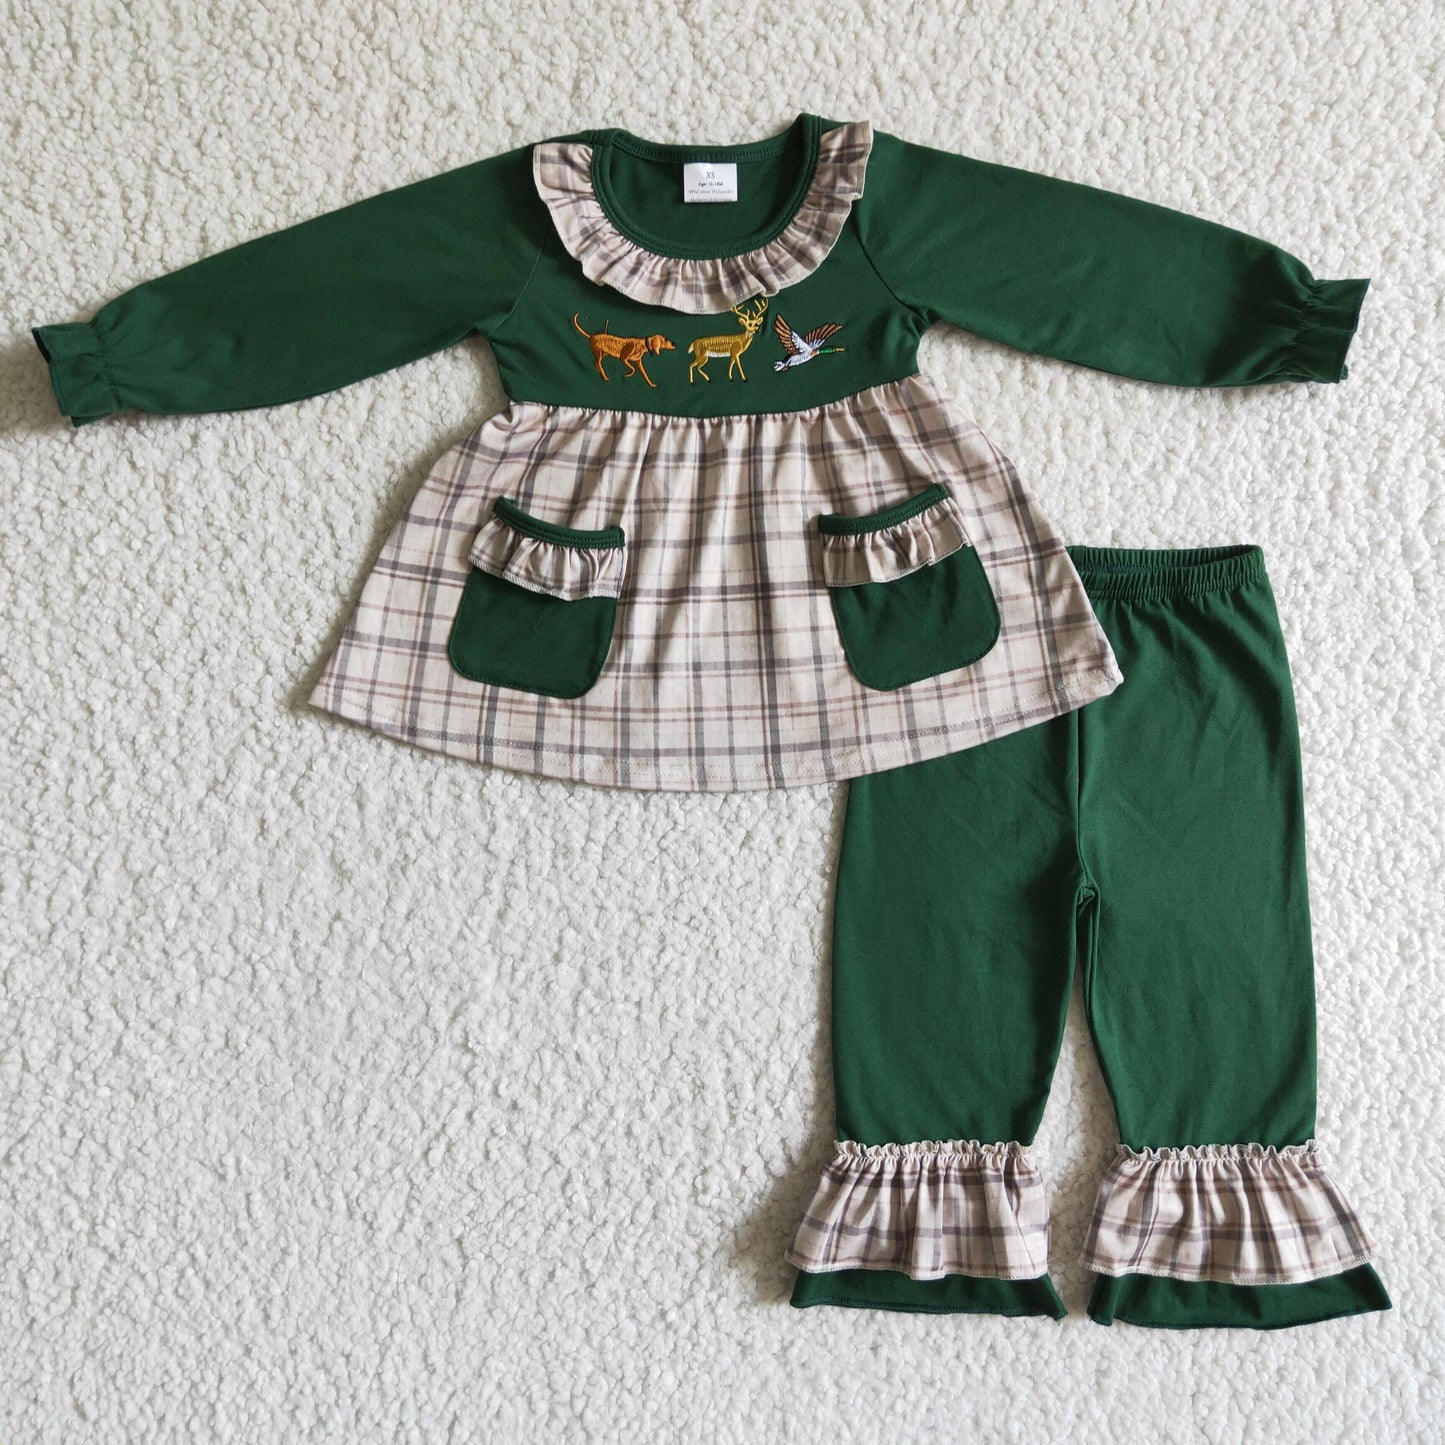 Dog deer duck embroidery girls sibling fall outfits